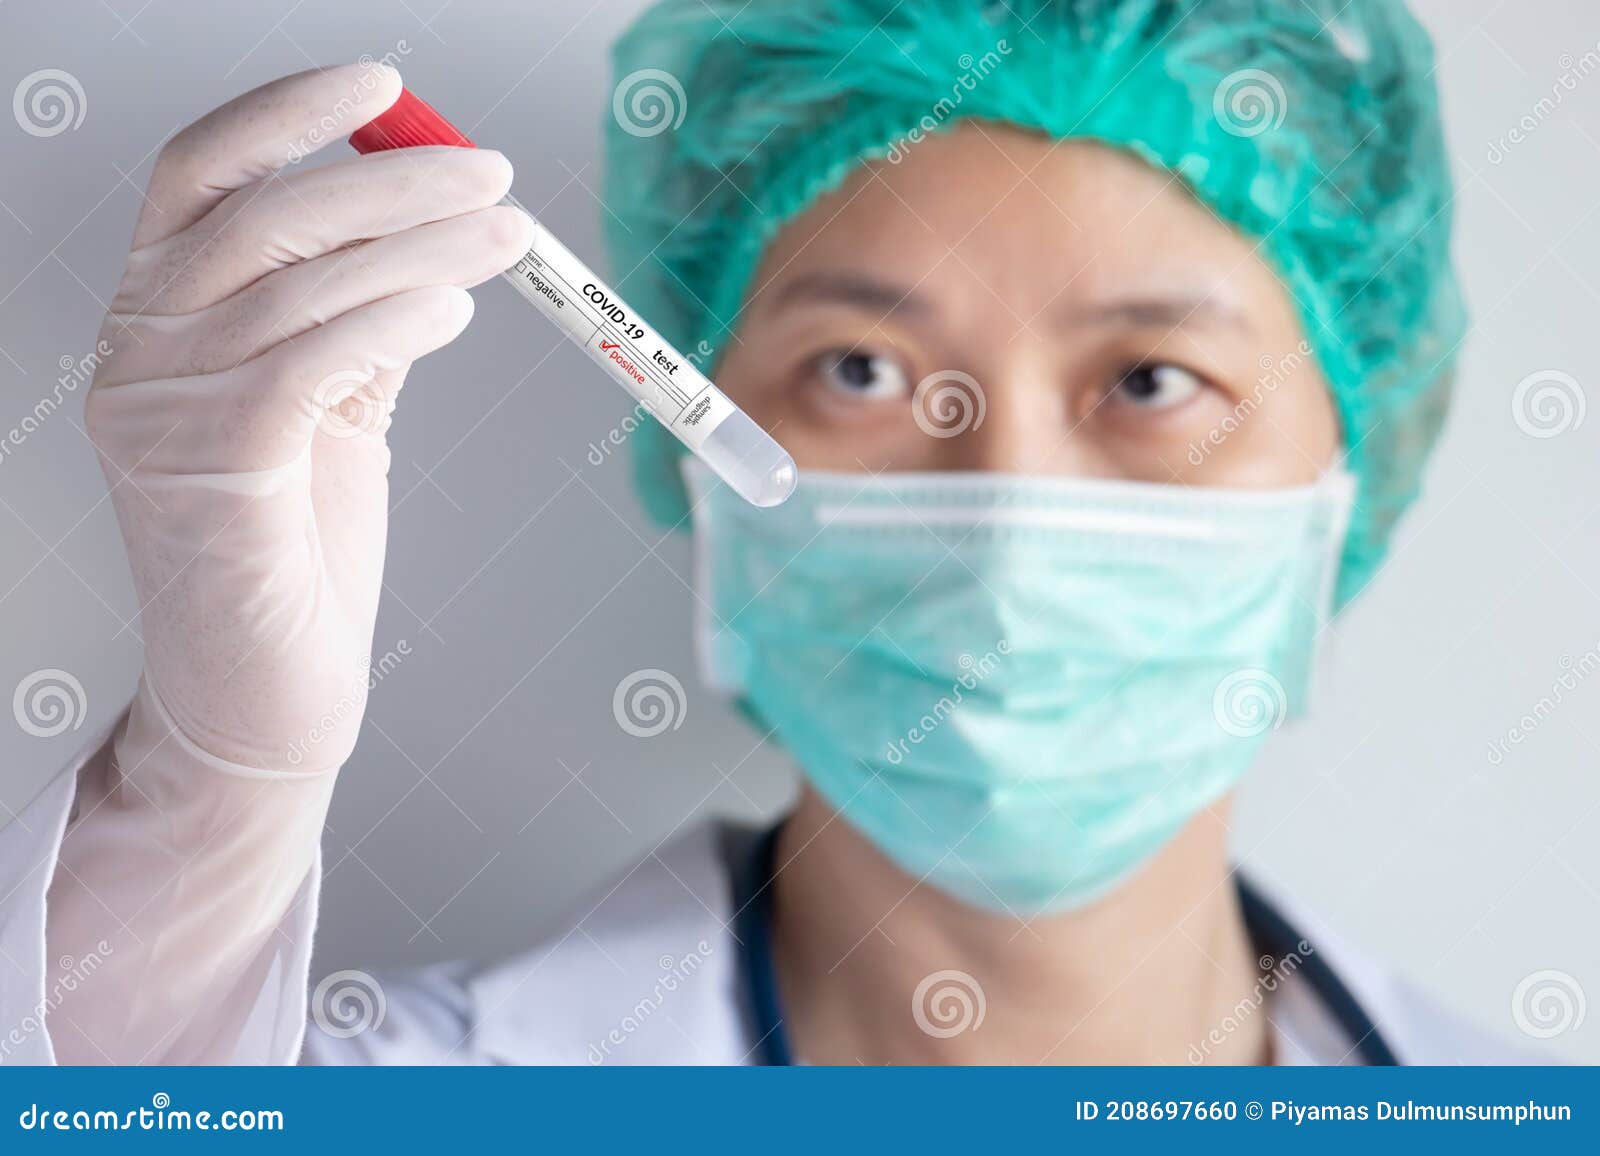 coronavirus covid-19 test concept. doctor`s hand with glove holding test tube with patient nasal secretion sample for covid virus